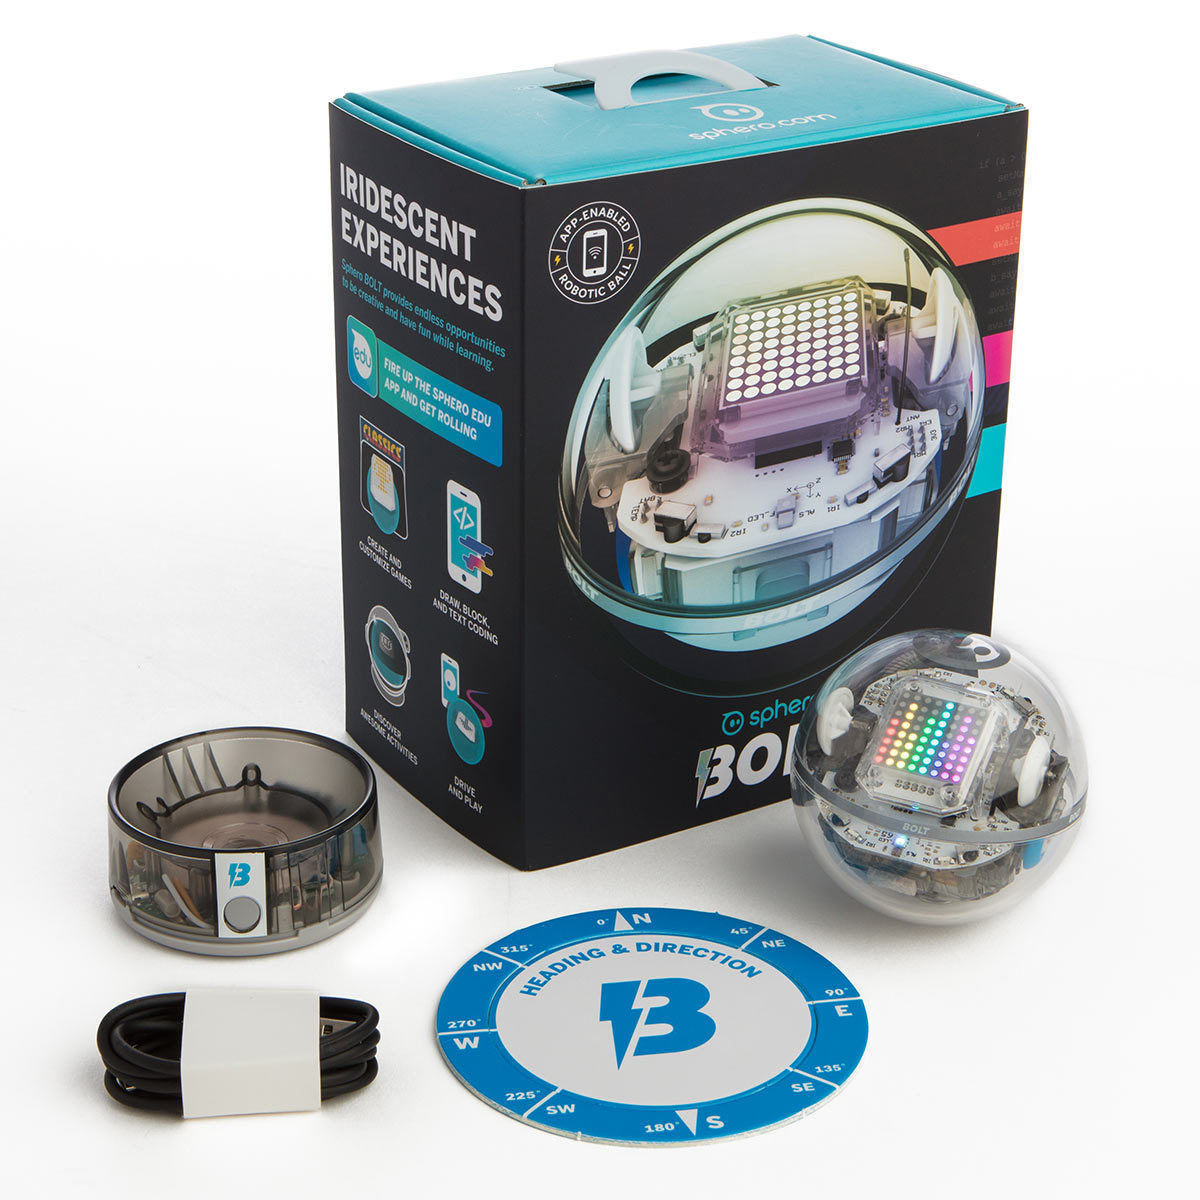 Boxed image of the sphero BOLT with the individual sphero infront, including the Sphero holder and compass